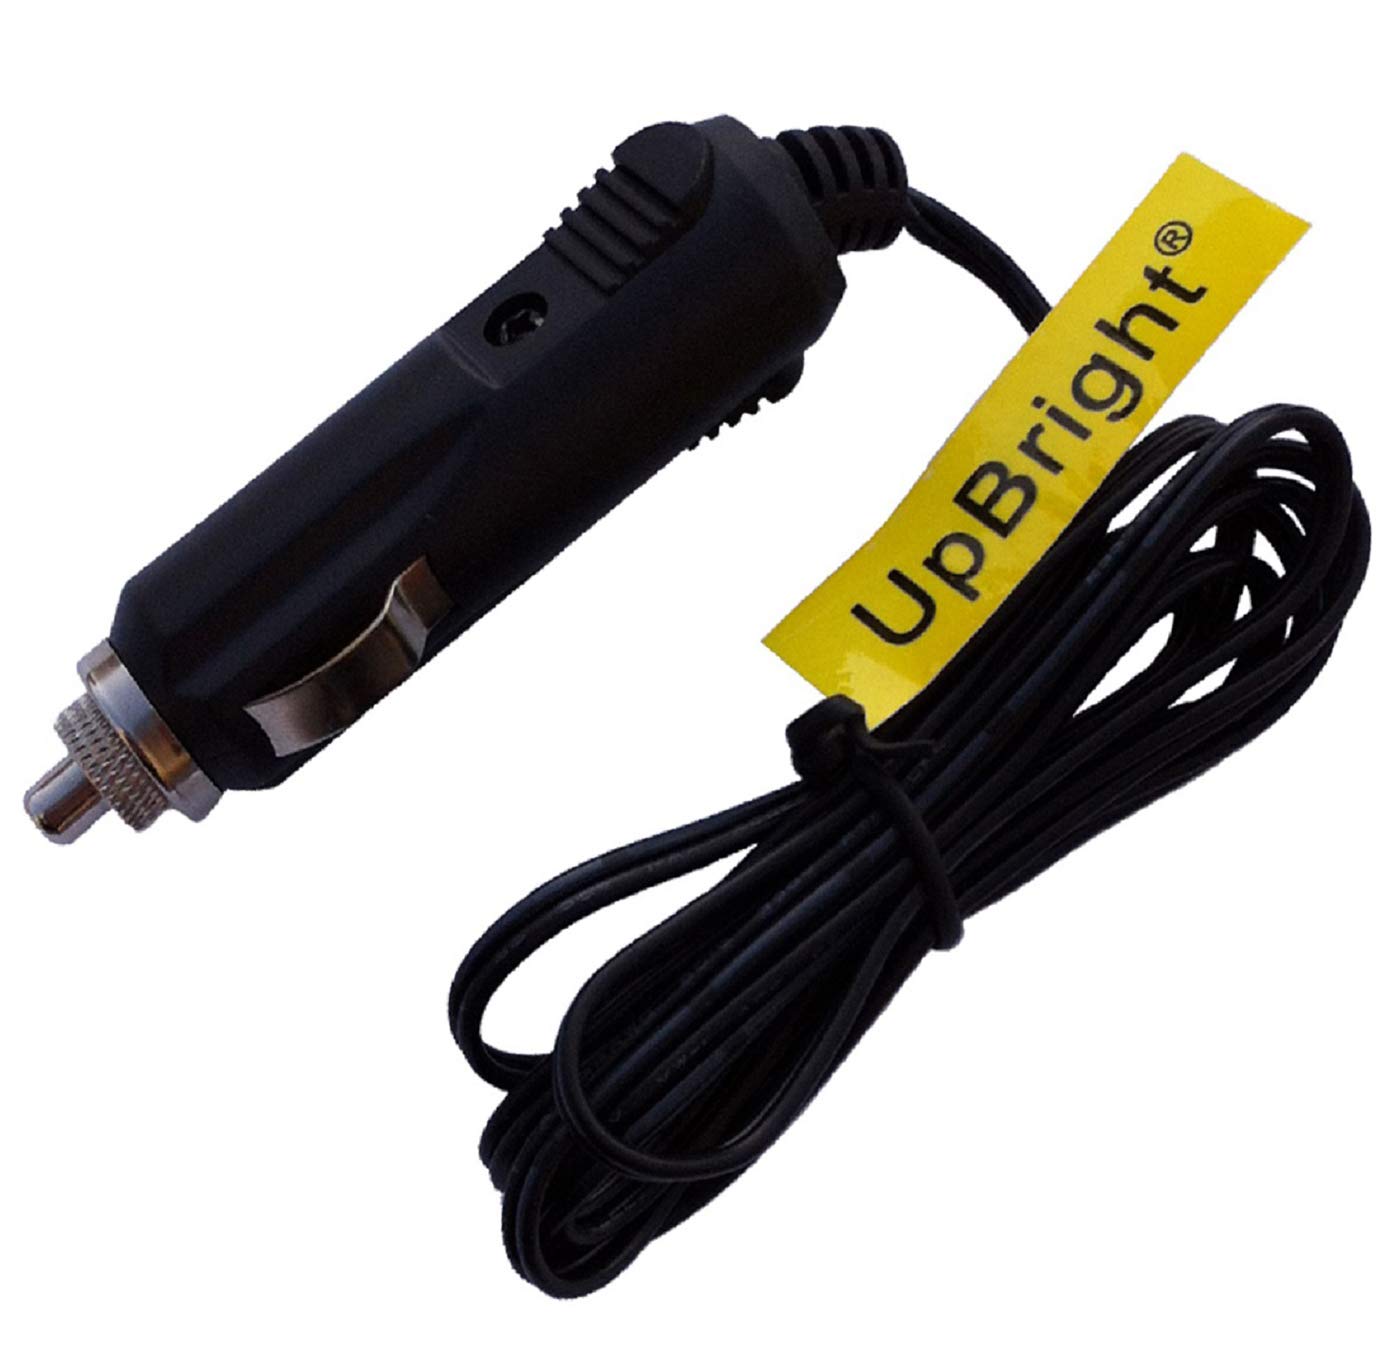 UpBright New Car DC Adapter Compatible with Curtis DVD 8017 DVD8039B DVD8007C DVD8007B Dvd8007 Dvd8402 Dvd7015 Ip844 Dvd8078 Portable Player Auto Vehicle Lighter Plug Power Cord Cable Charger PSU